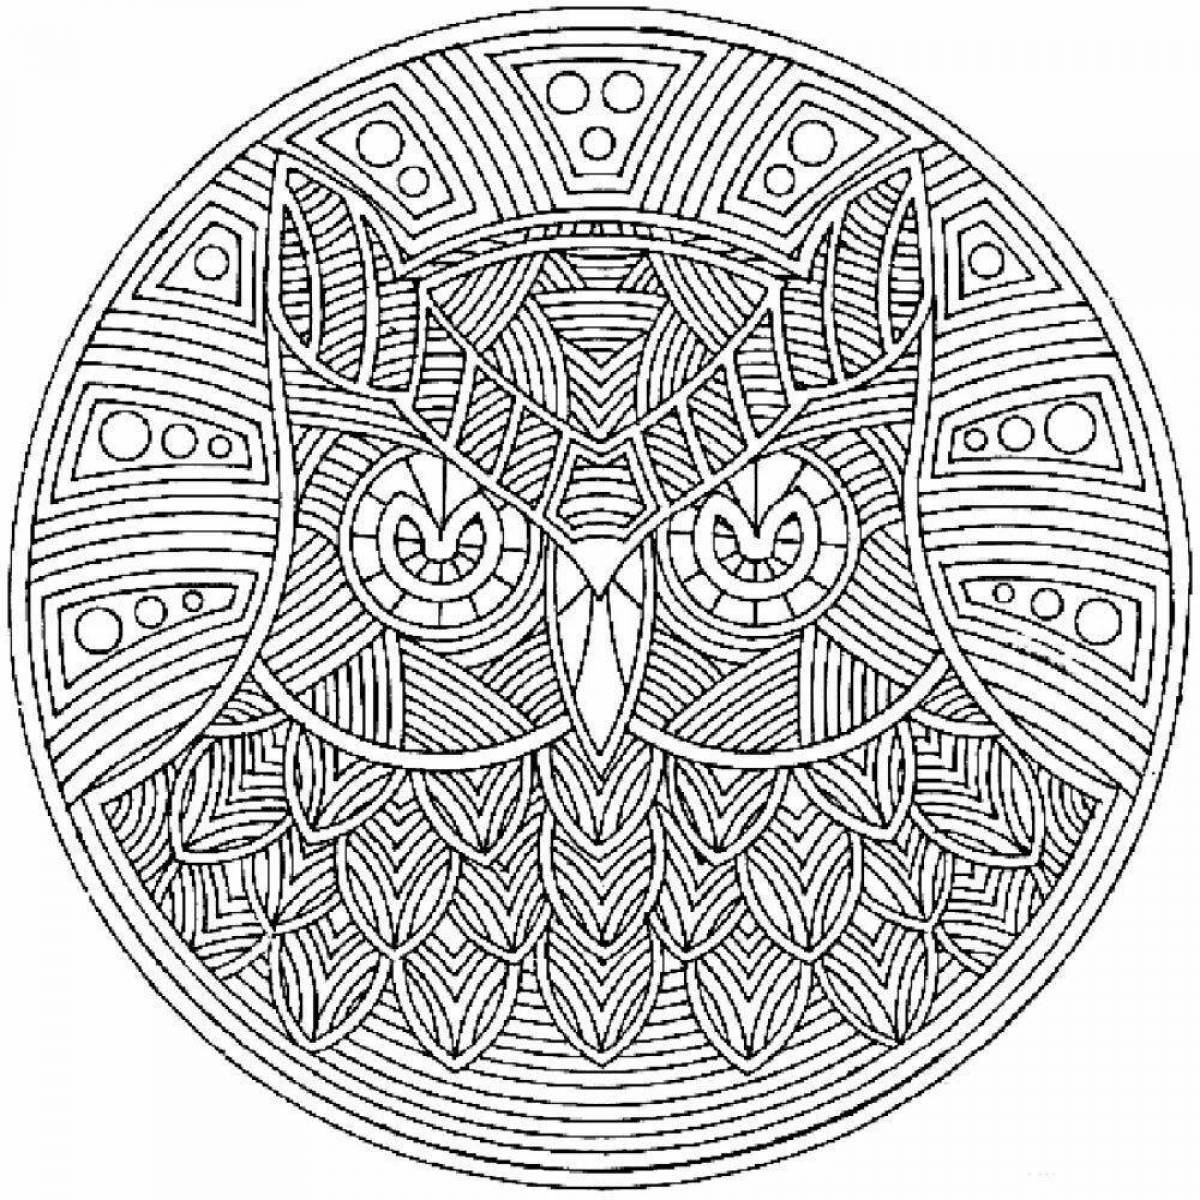 Coloring page intricate patterns - sweet